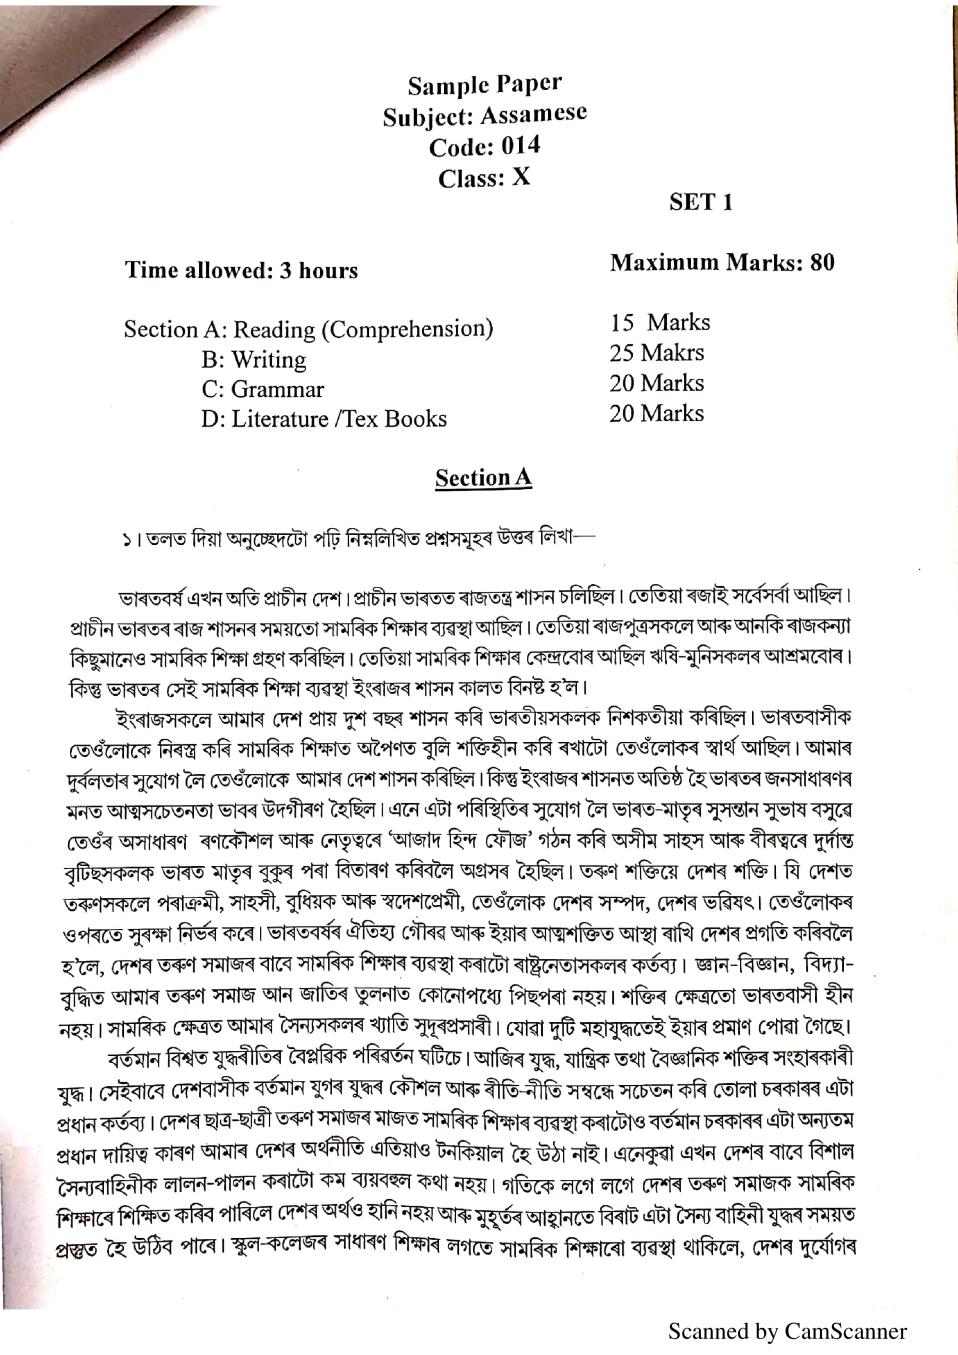 CBSE Class 10 Sample Paper 2020 for Assamese - Page 1